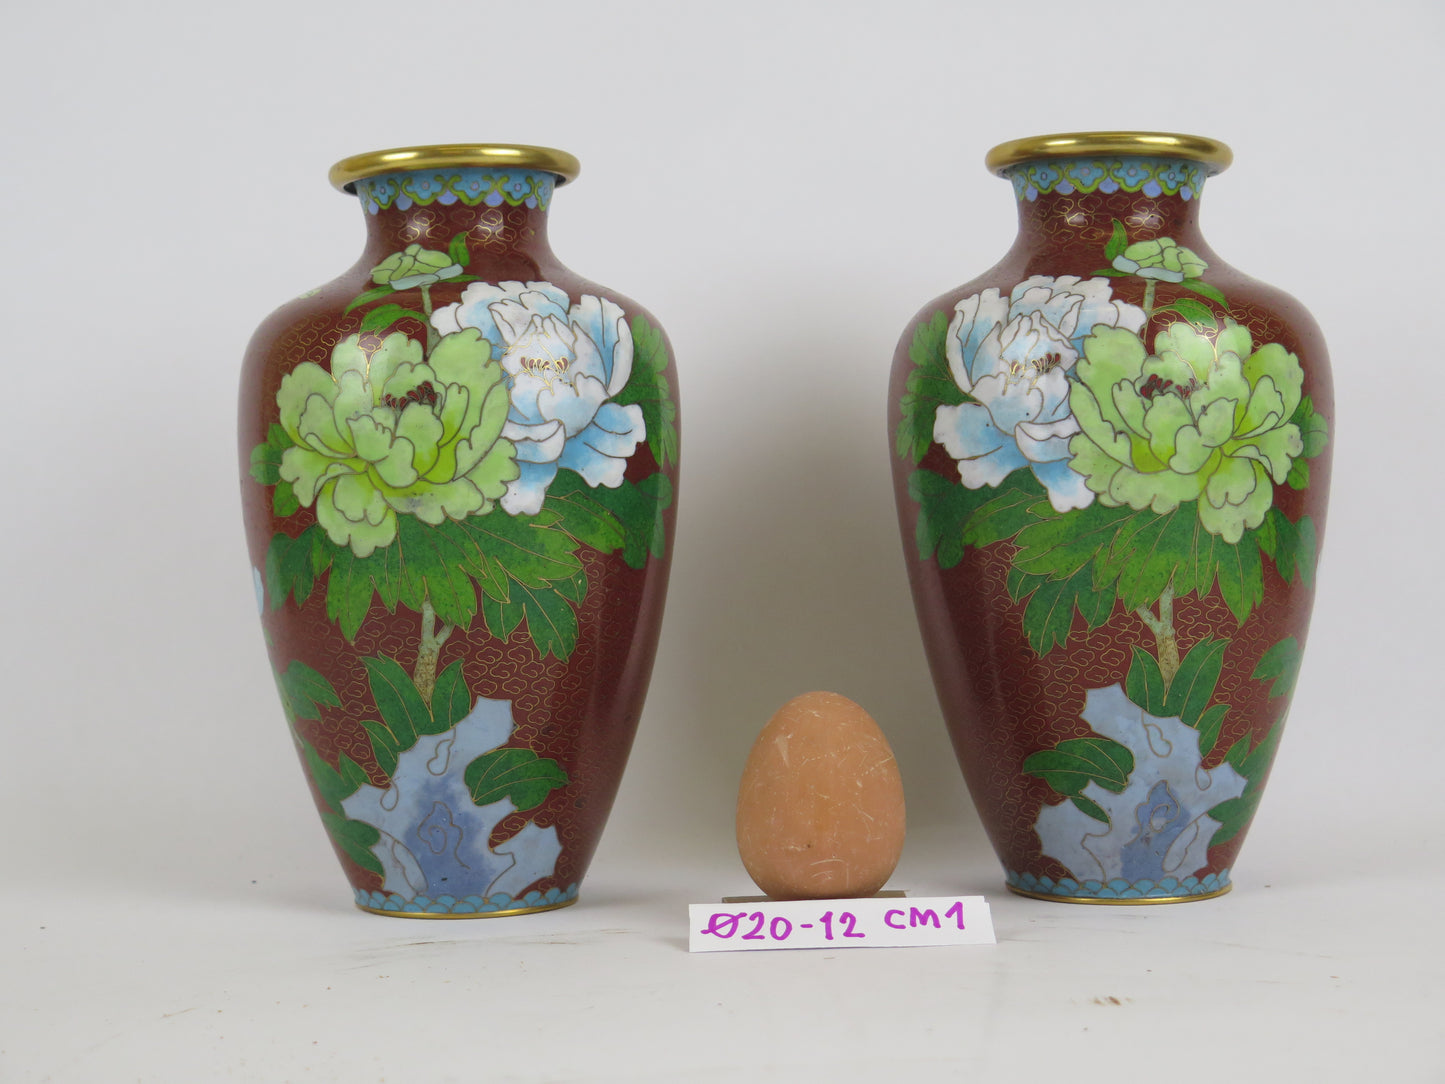 Pair of cloisonné vases vintage vase China Asia red colored floral flowers CM1